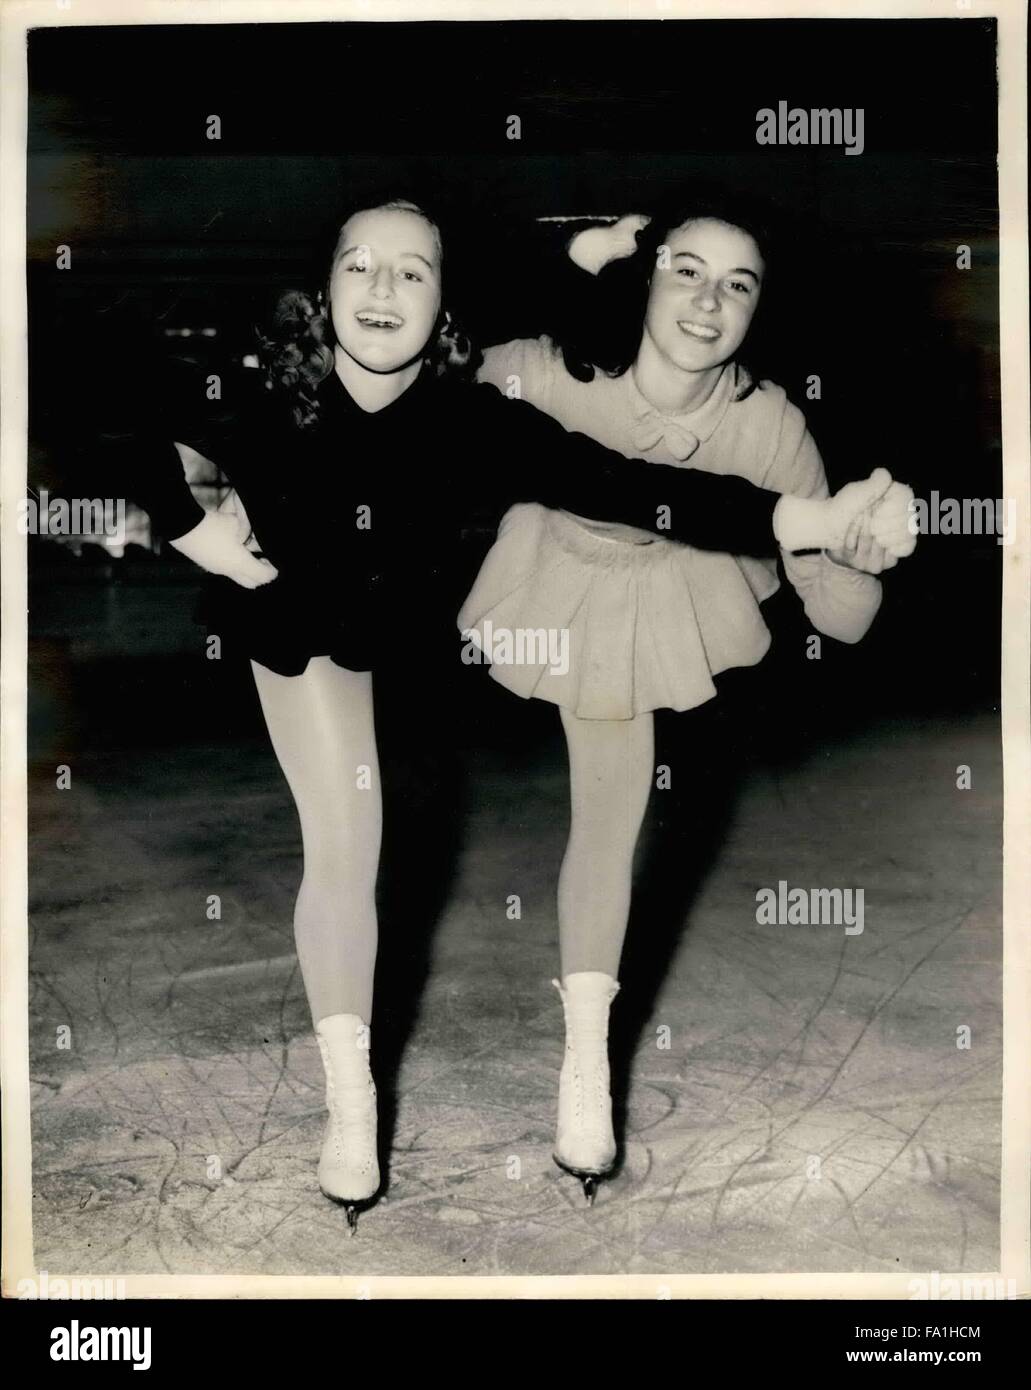 1964 - Training For The International Skating Competition. Entente Cordiale - Germany And France. Competitors from many countries are to be seen at the Richmond Ice Rink training for the forthcoming International Ladies Skating Competition. KEYSTONE PHOTO SHOWS:- L-R:- ERIKA RUCKER (16) from Munich, Germany and GILBERTE NABOUDET (17) from France skating together on the ice at Richmond. © Keystone Pictures USA/ZUMAPRESS.com/Alamy Live News Stock Photo